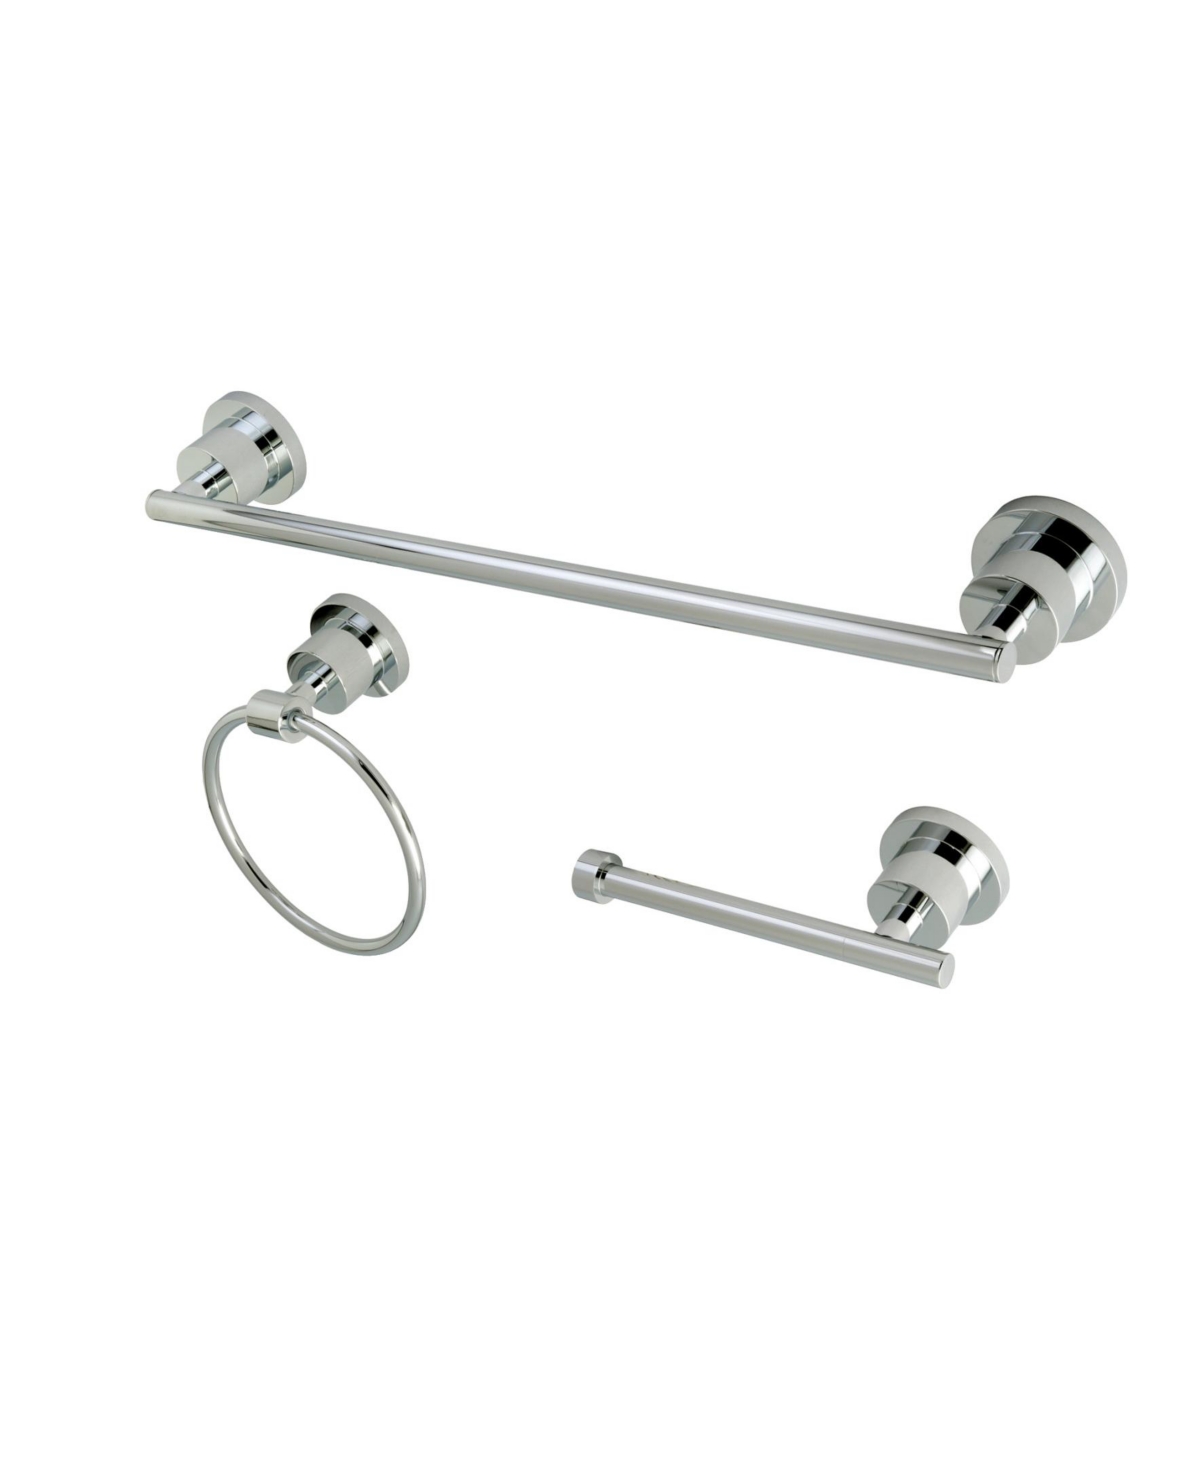 Kingston Brass Concord-Modern 3-Pc. Bathroom Accessories Set in Polished Chrome Bedding